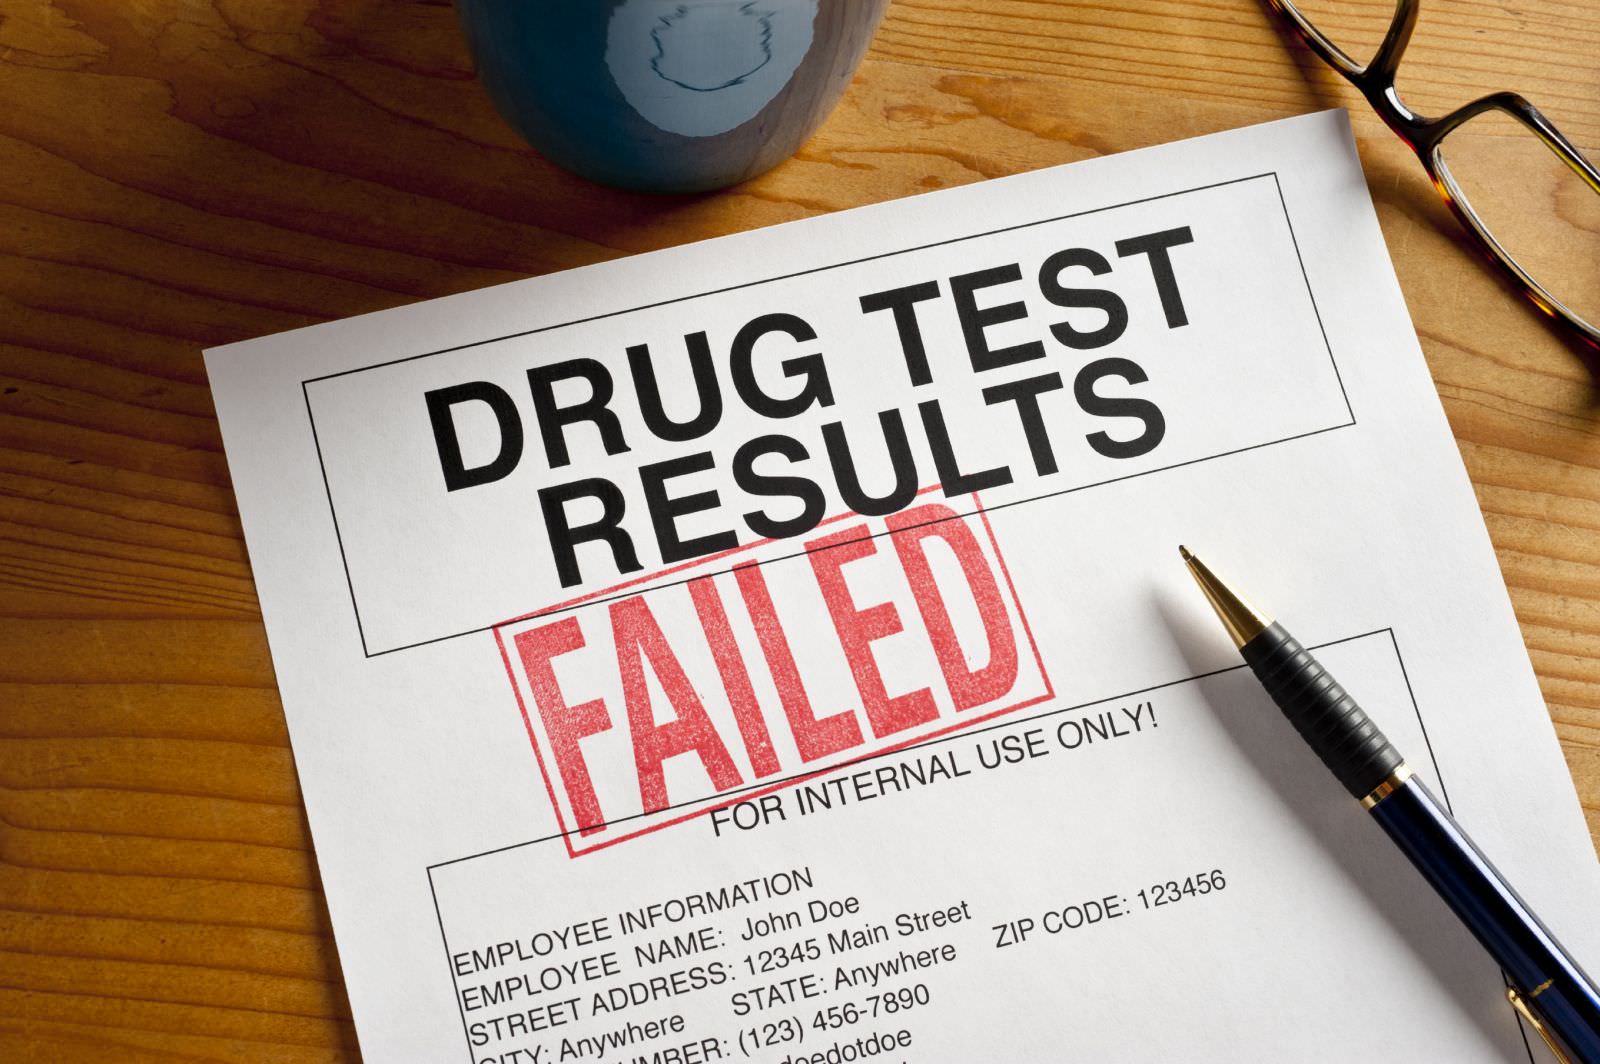 how to pass a drug test